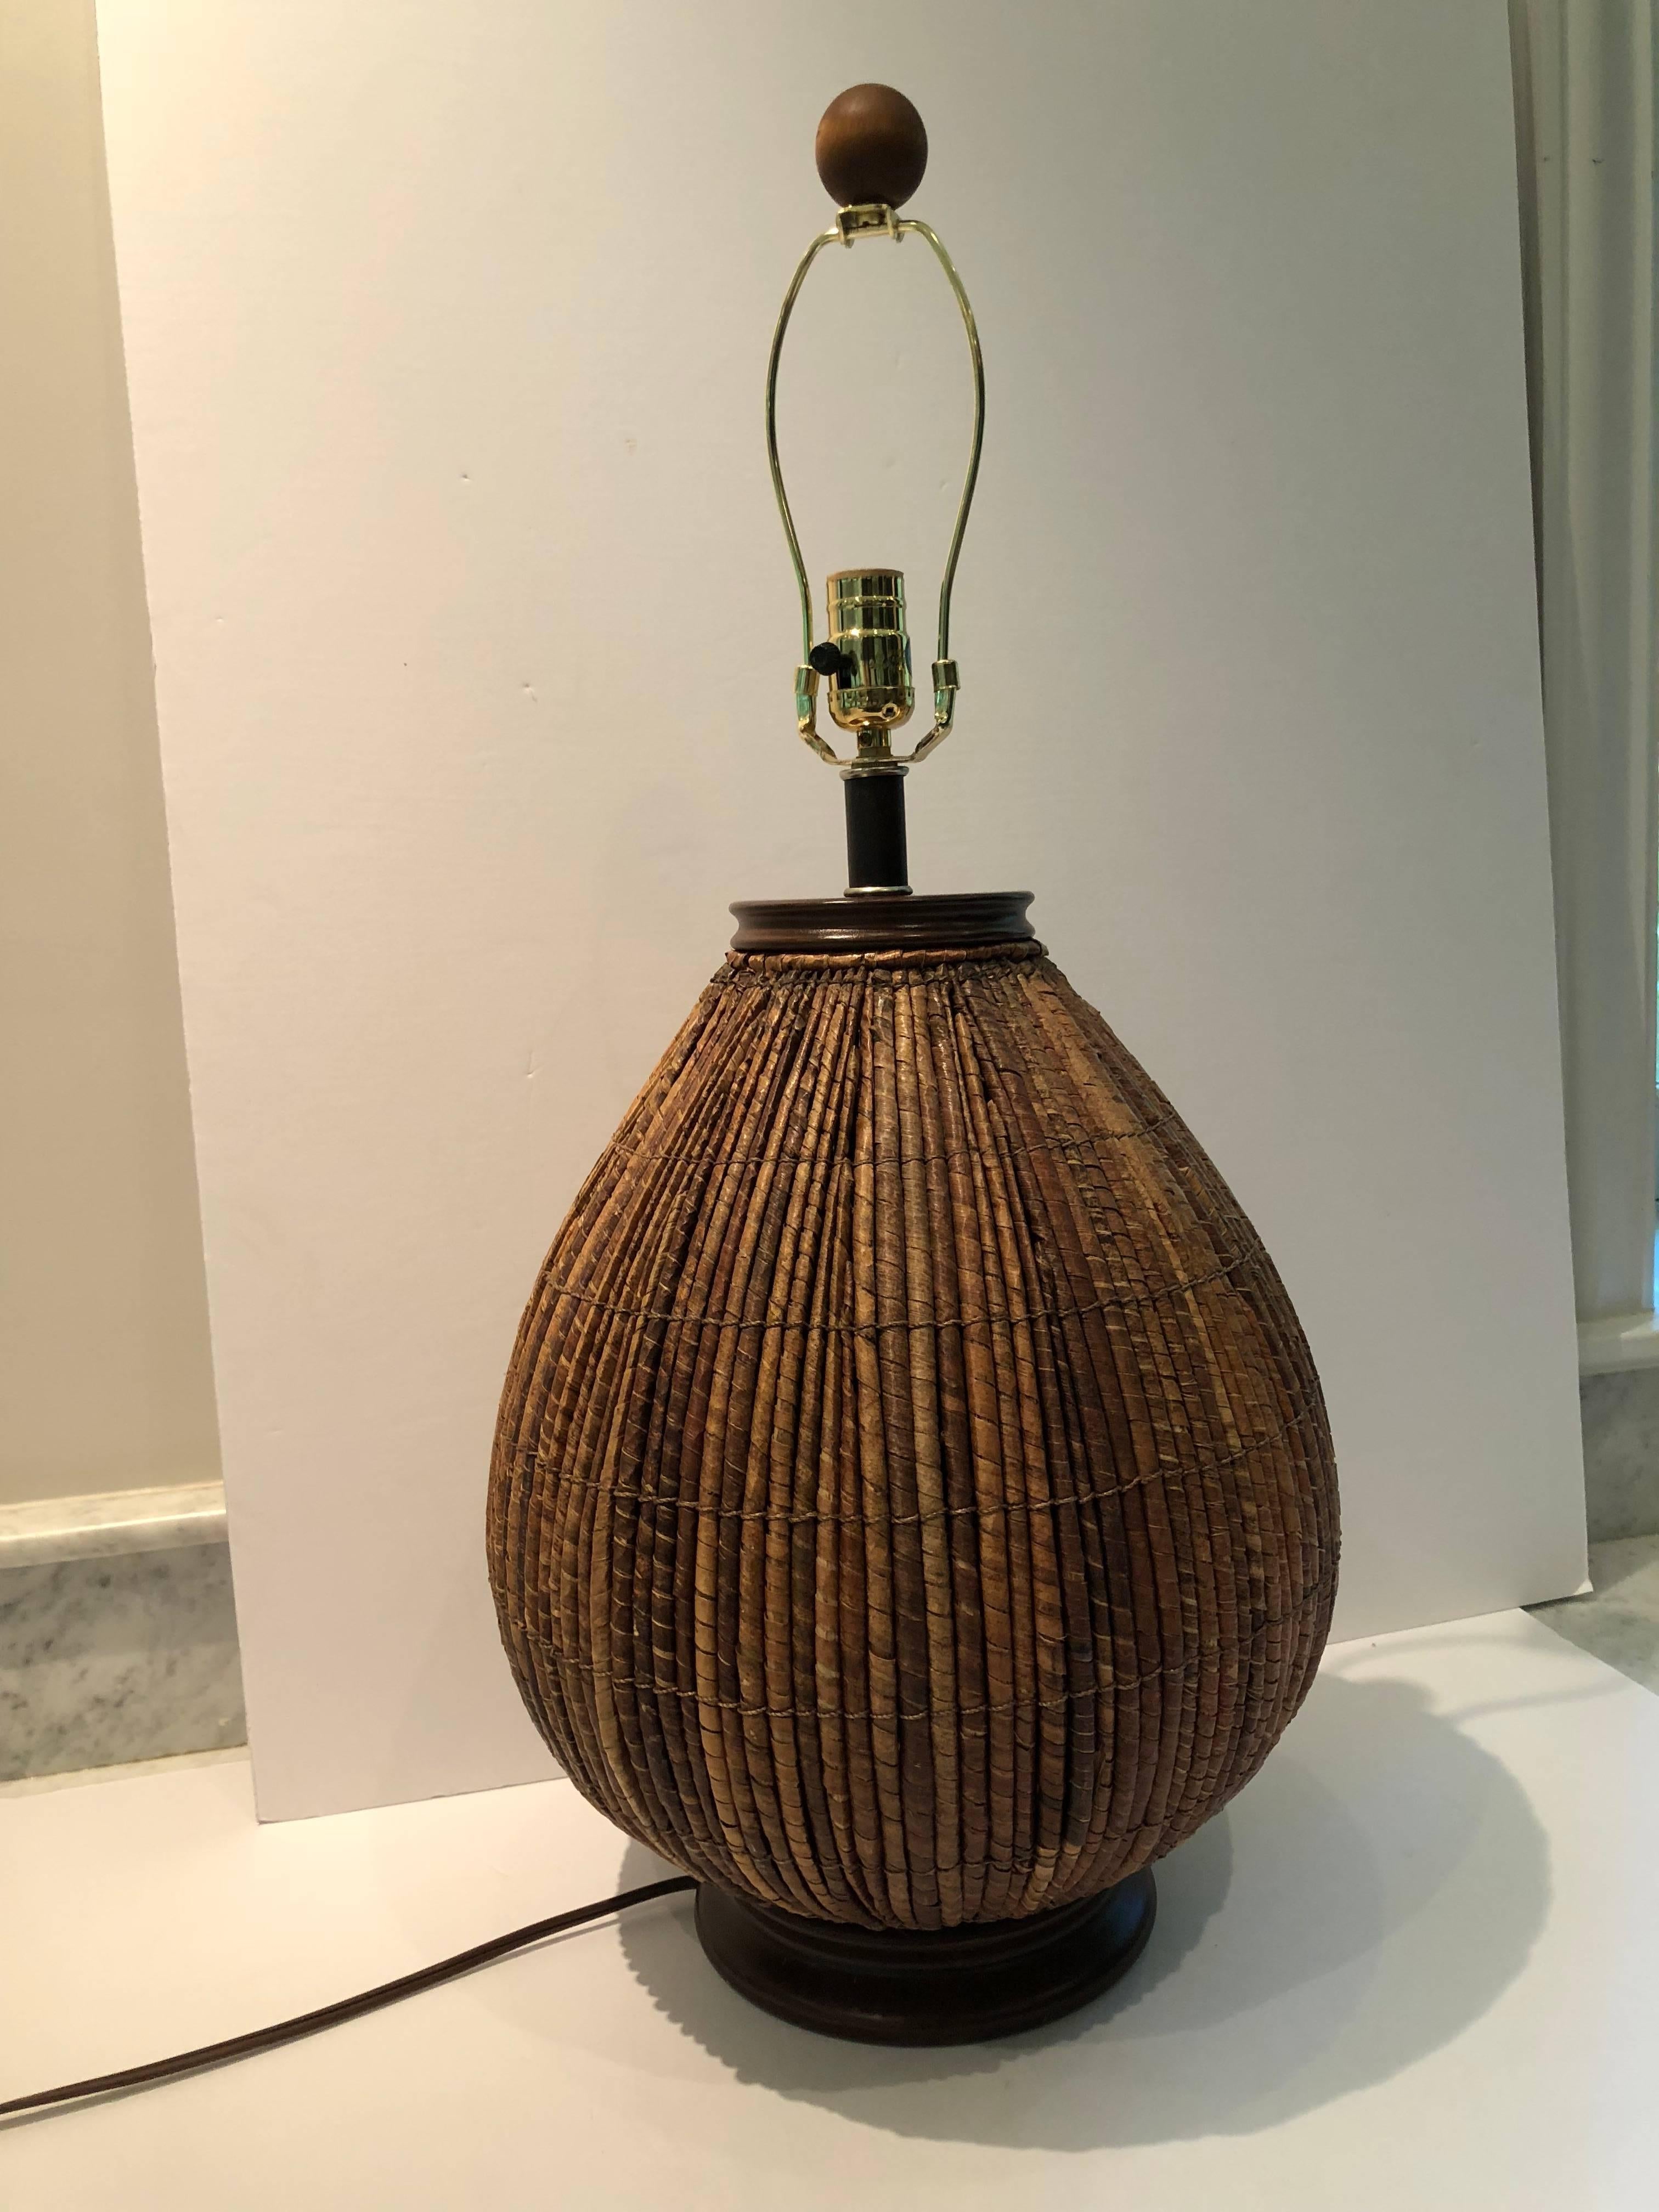 Large midcentury rattan lamp by Palecek. The lamp has a dark wooden base and neck and round finial. The rattan is of varying shades of brown adding to it’s textural appeal. . Custom shade in off-white linen lined in taupe silk.
 